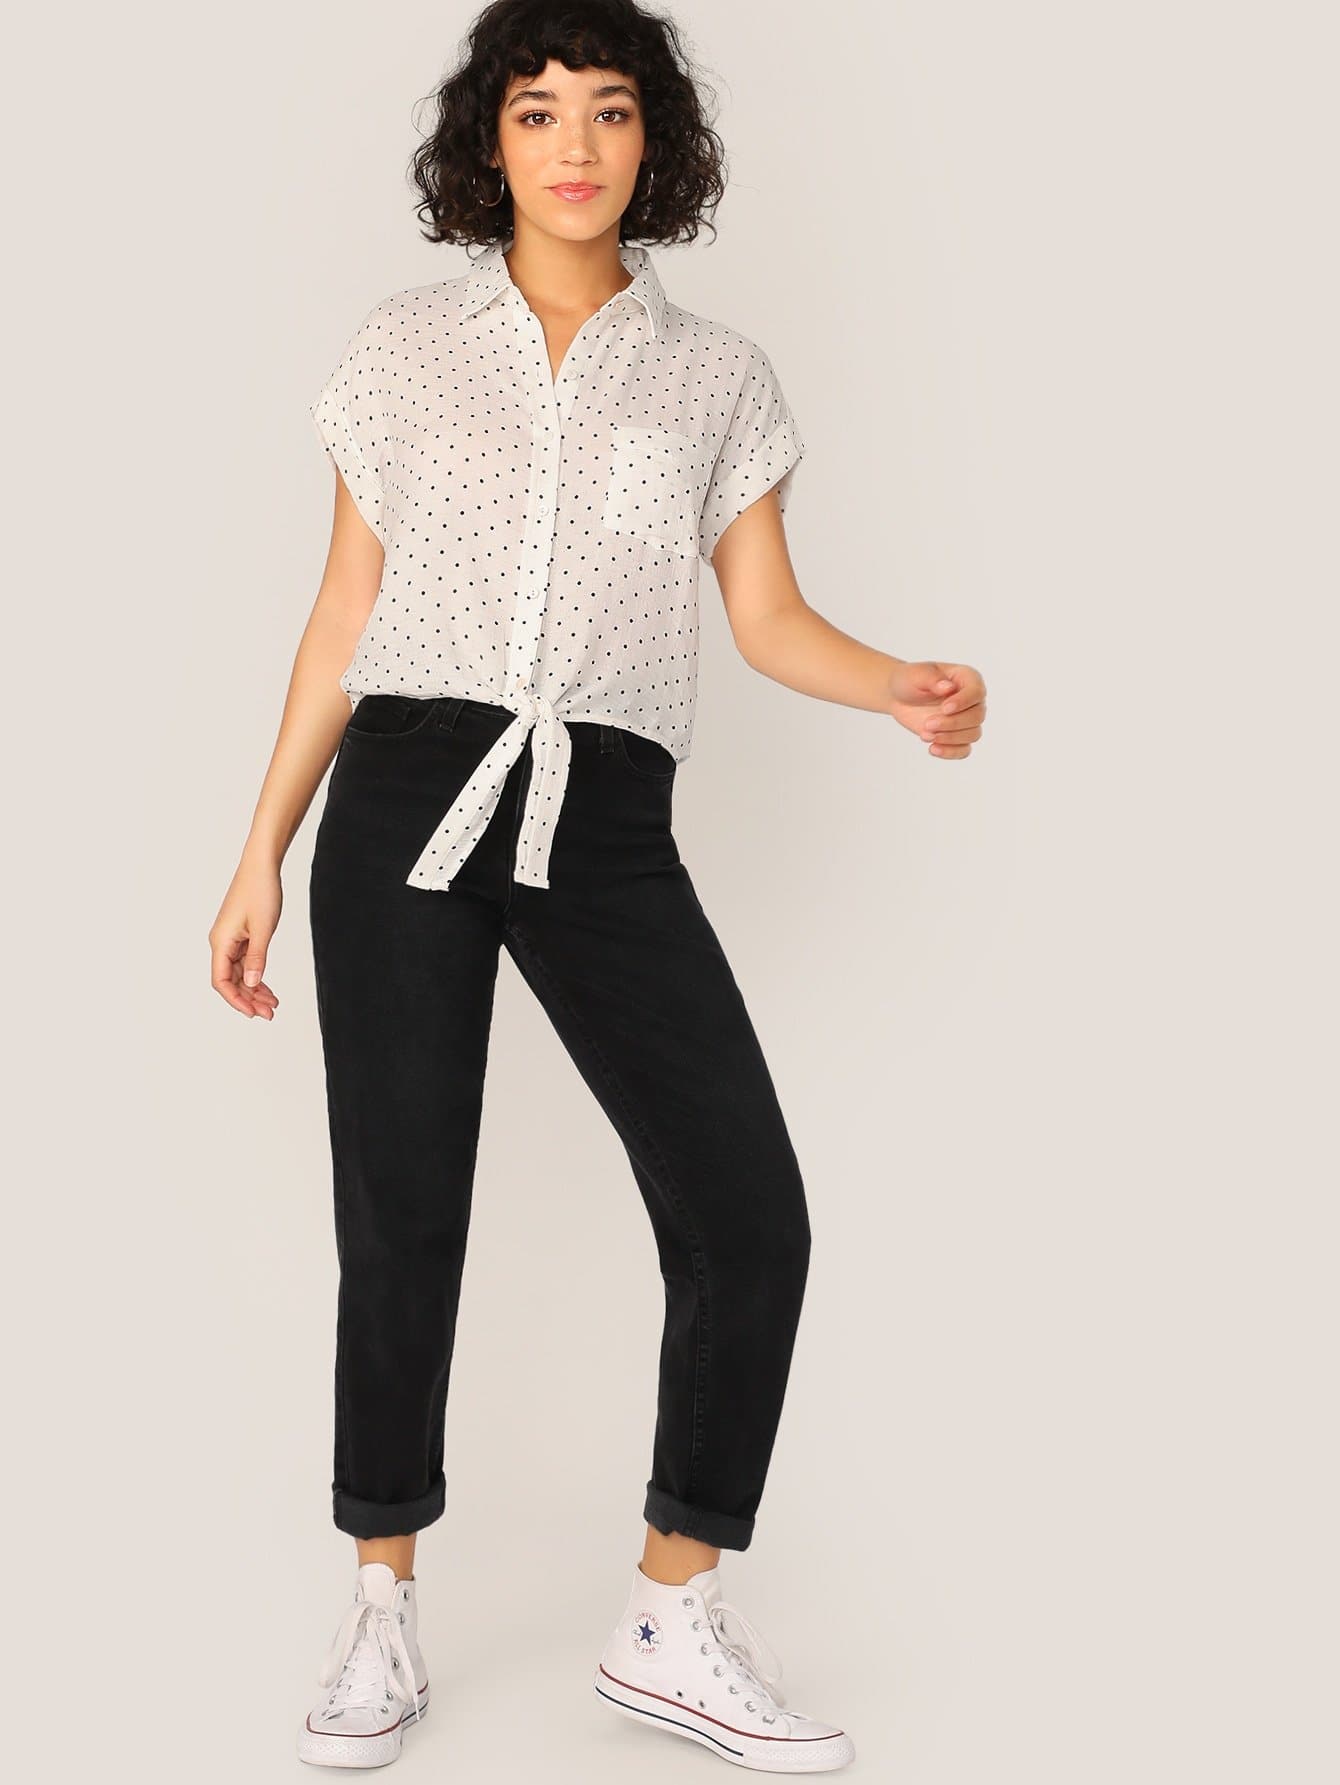 Black and White Button Front Tie Hem Cuff Sleeve Polka Dot Shirt